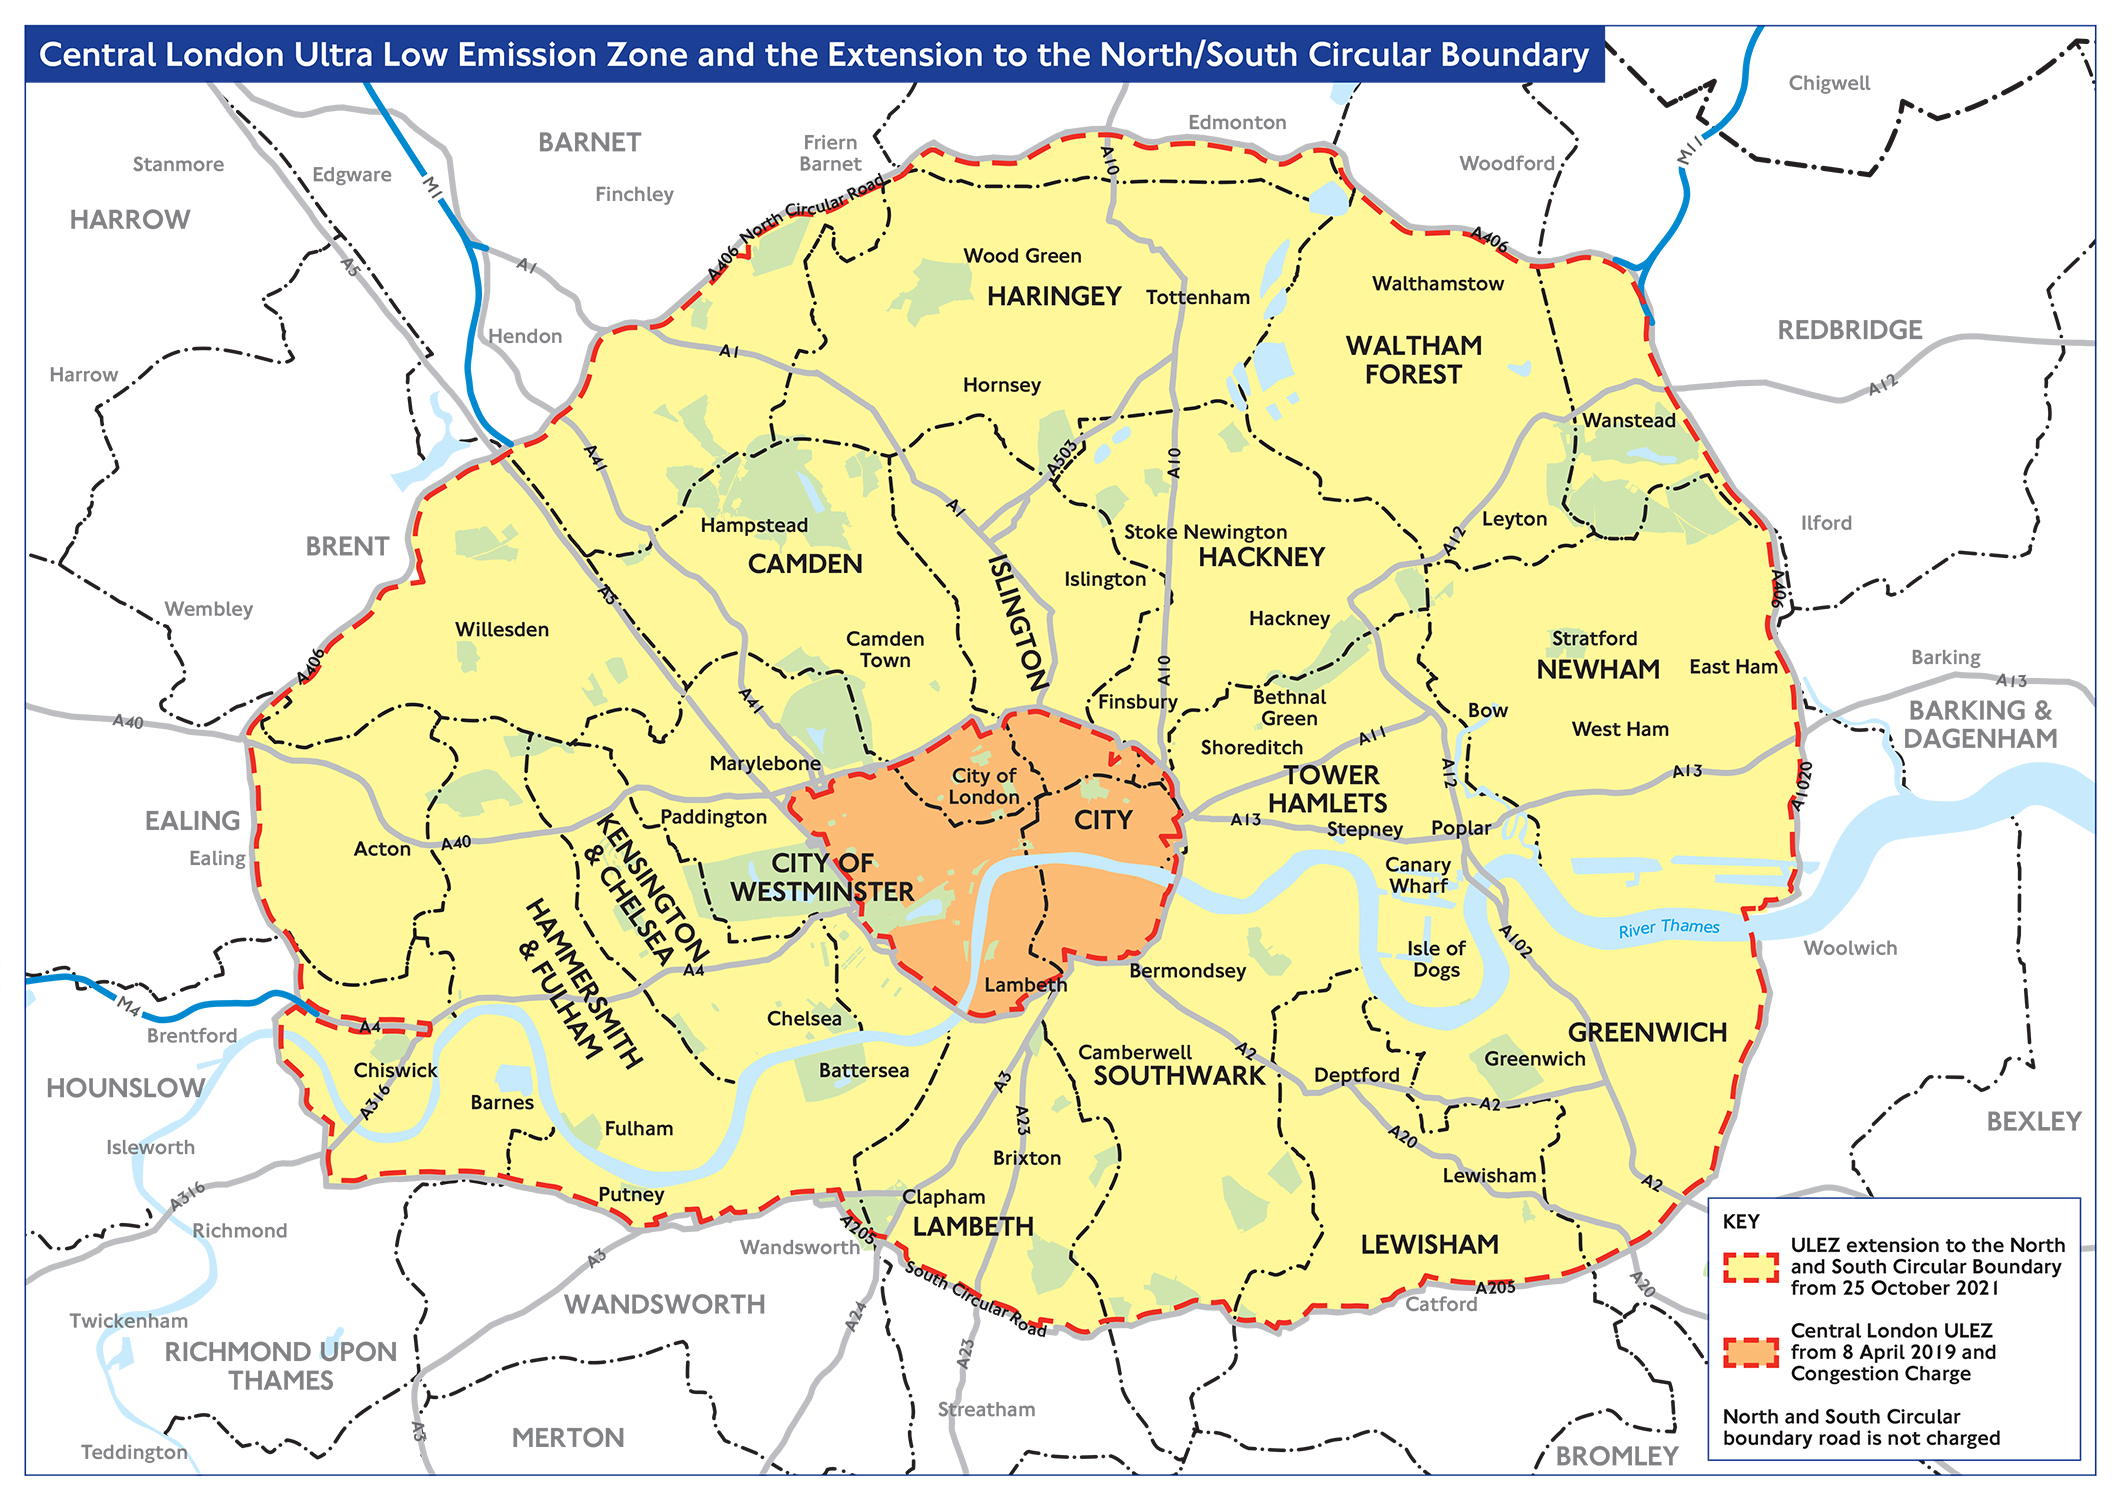 Map showing old London ULEZ zone in orange, and new 2021 ULEZ expansion zone in yellow.